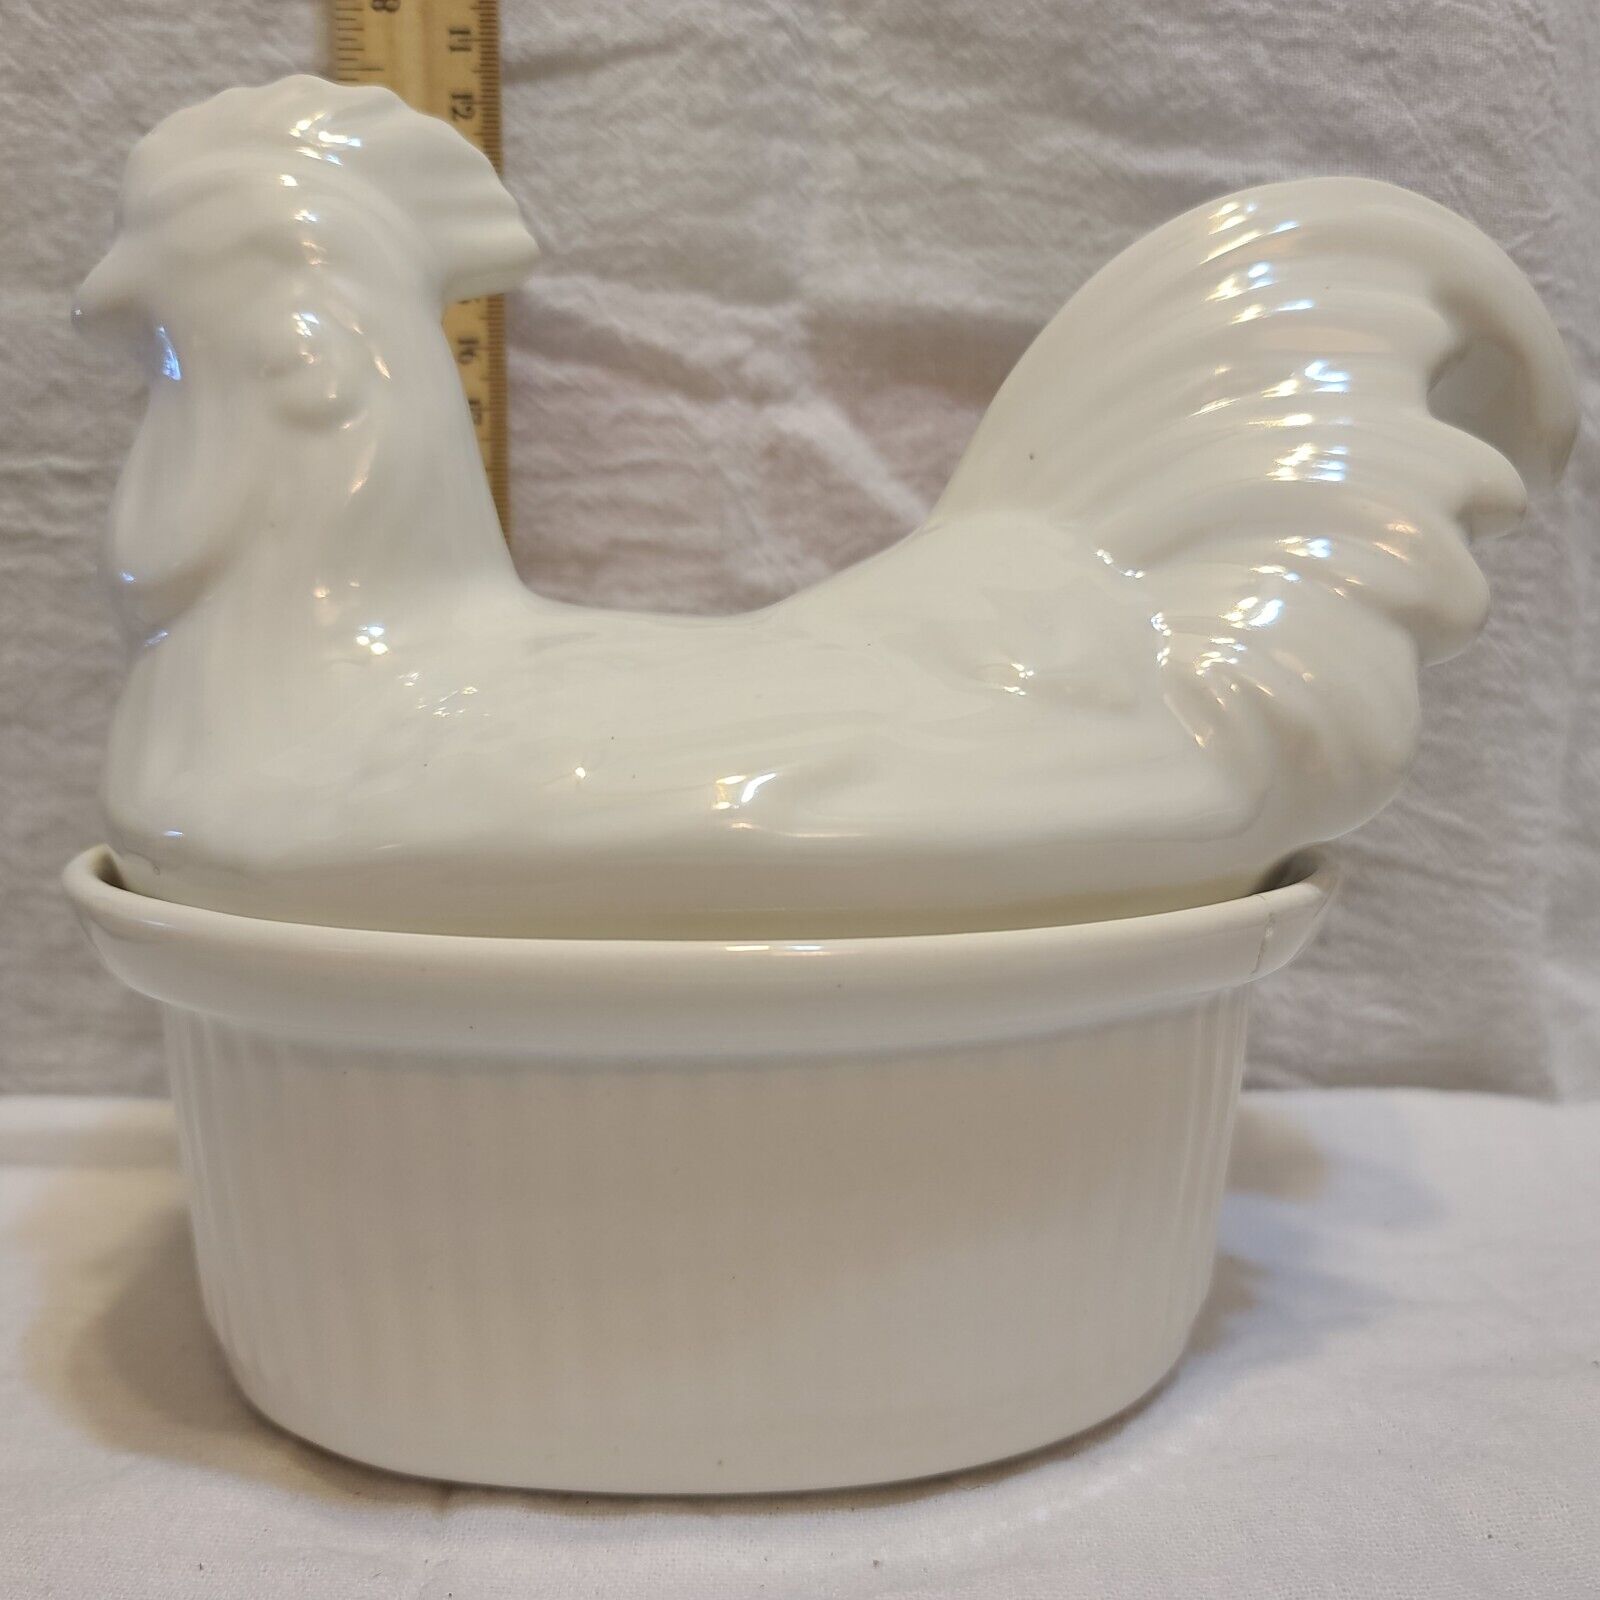 Vintage White Porcelain Tureen With Lid Decorated With Rooster Cali USA